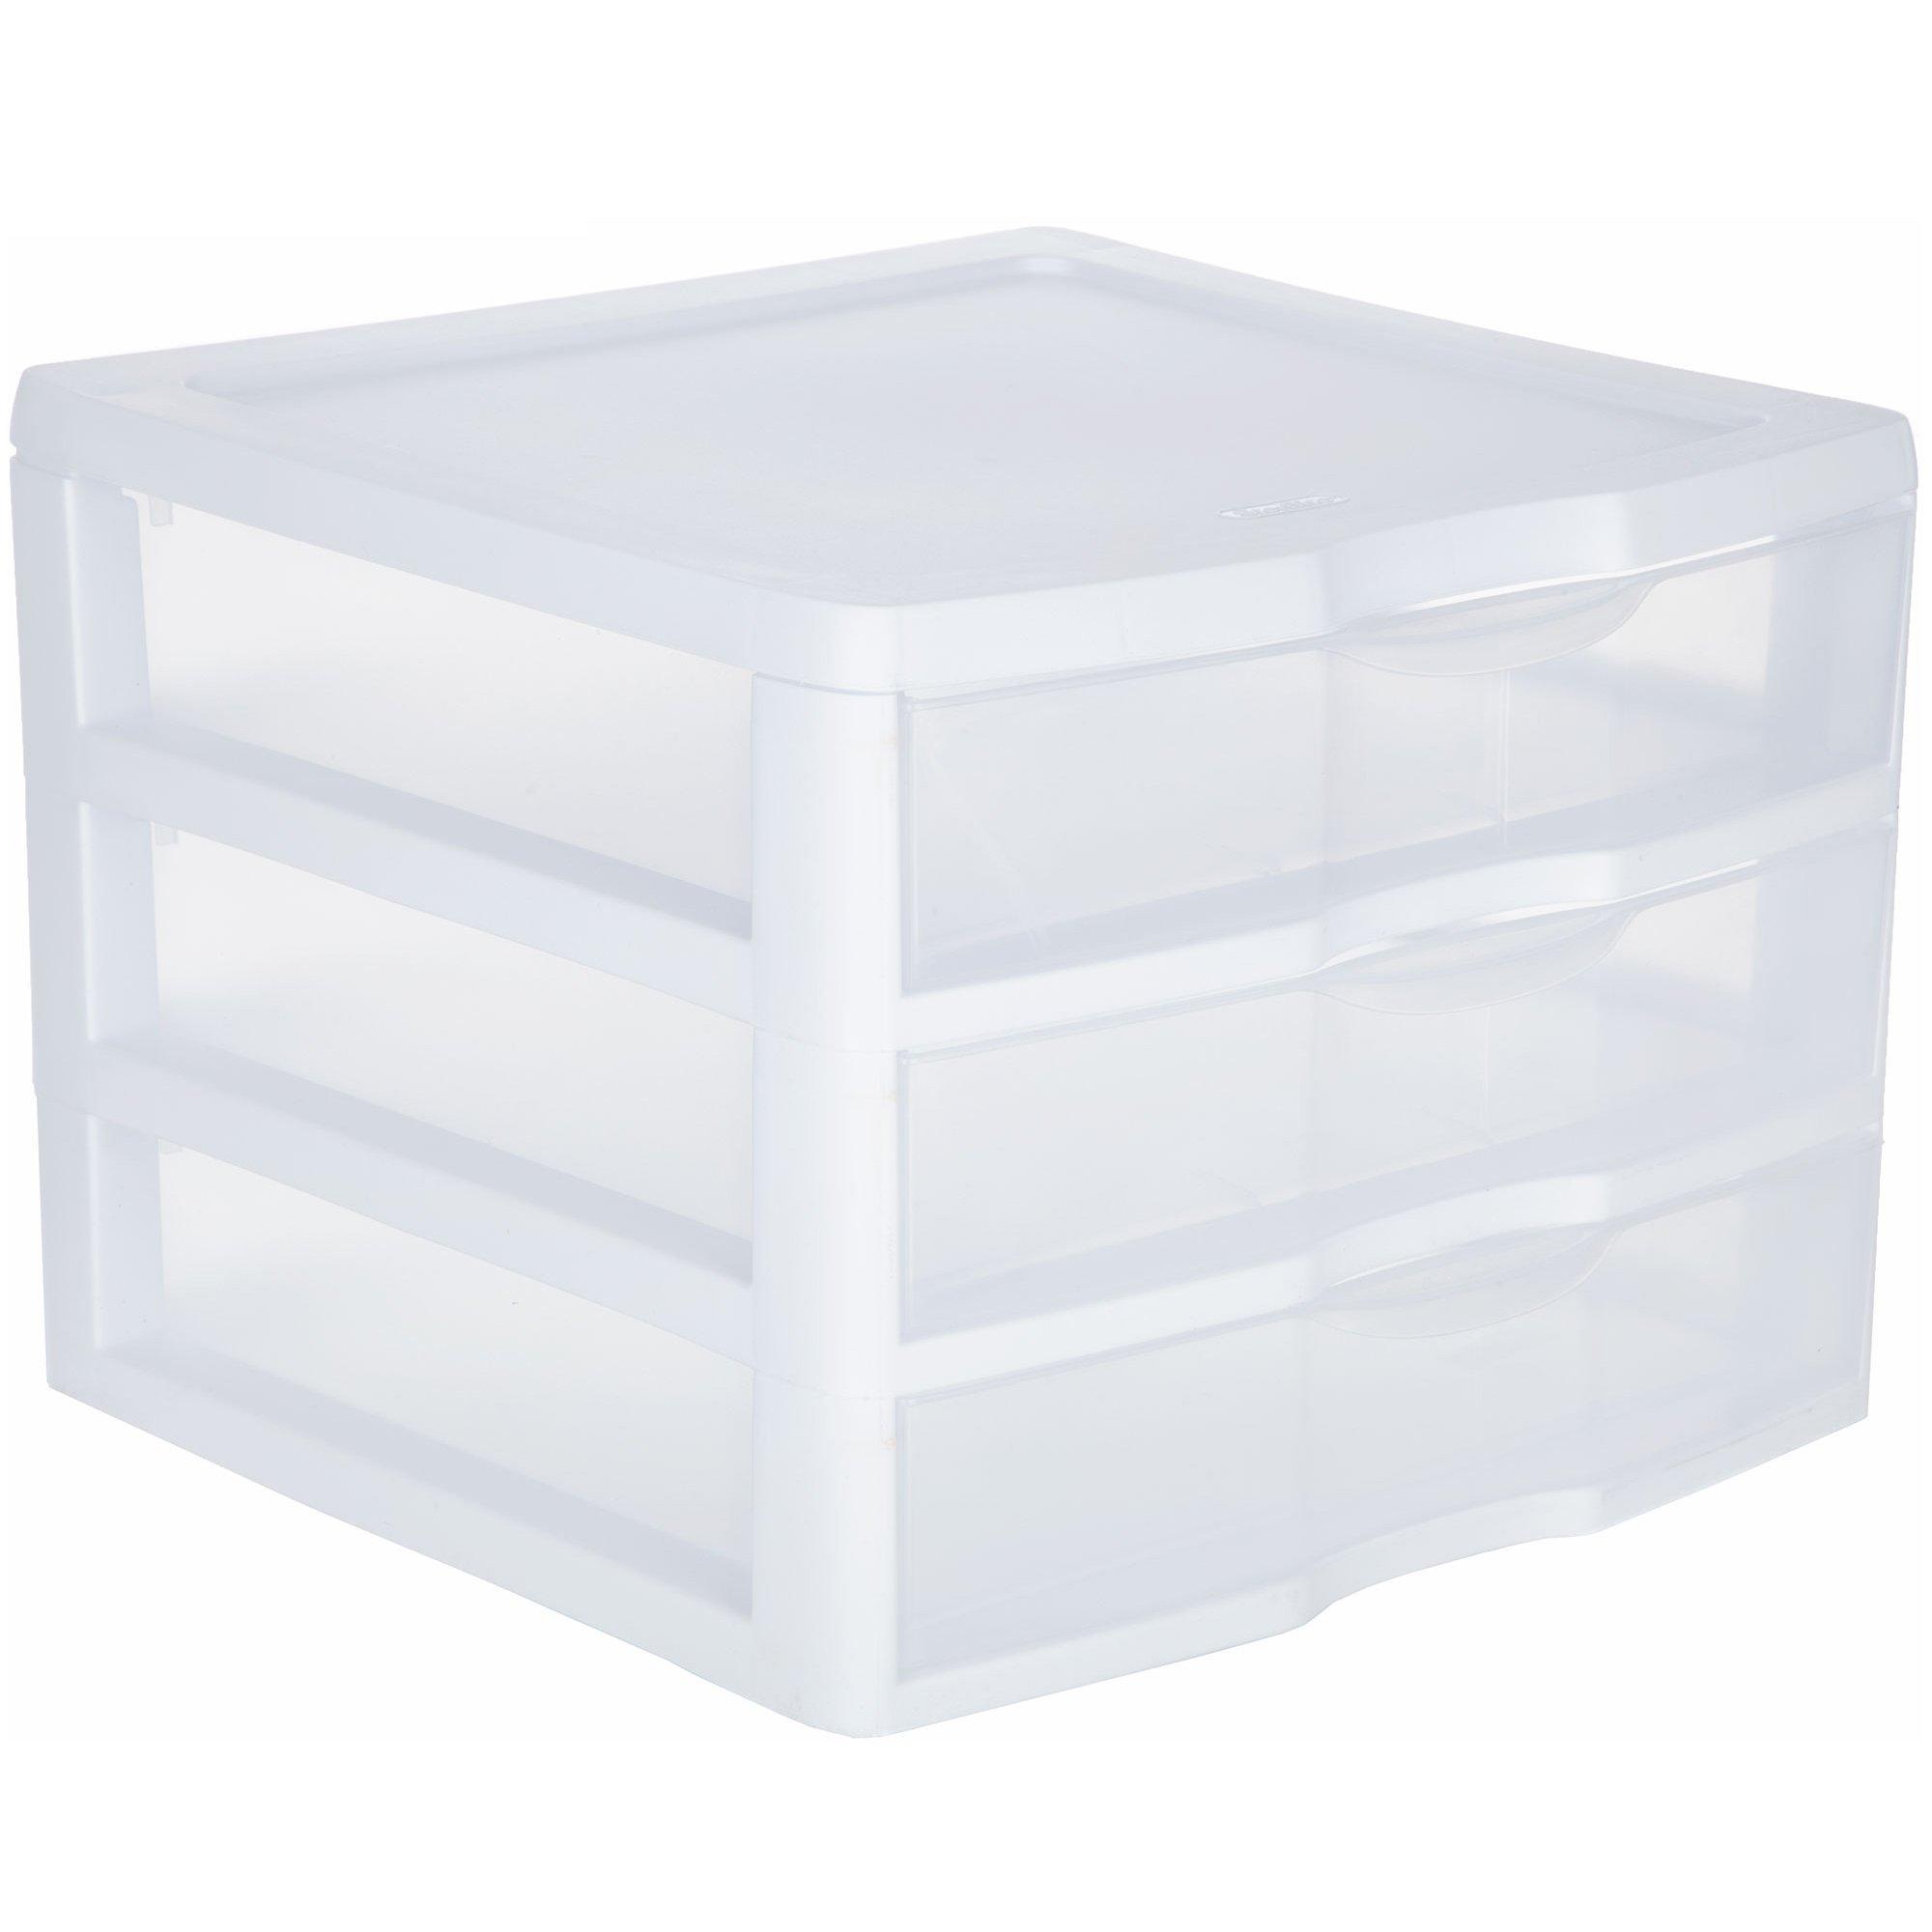 Sterilite ClearView Small 5-Drawer Organizer - White/Clear, 1 ct - Kroger